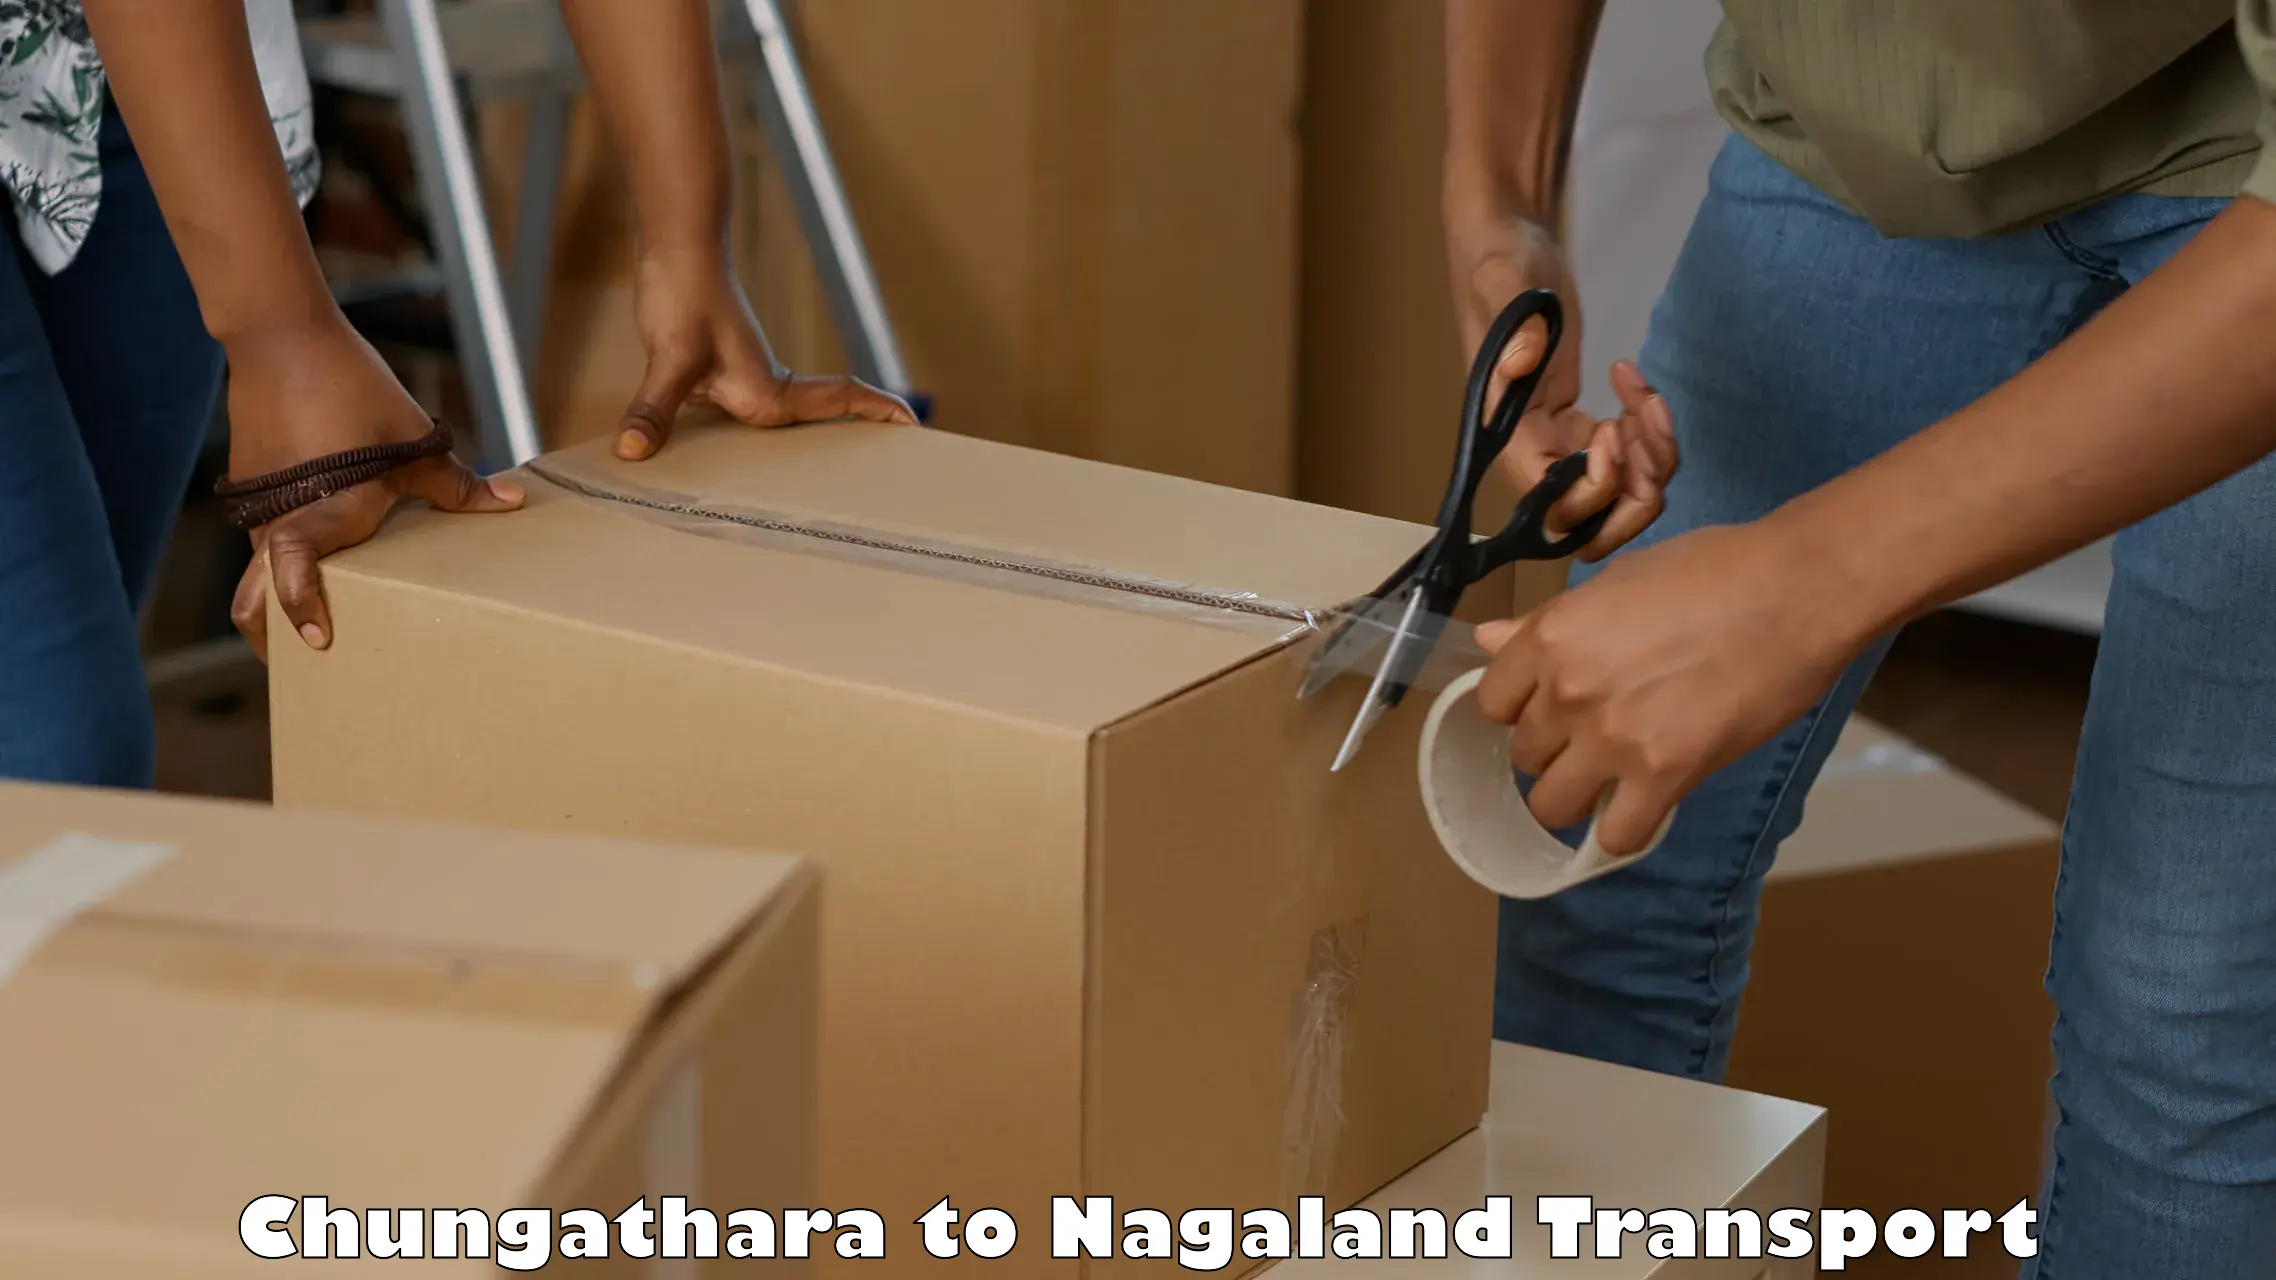 Cargo transport services in Chungathara to Dimapur